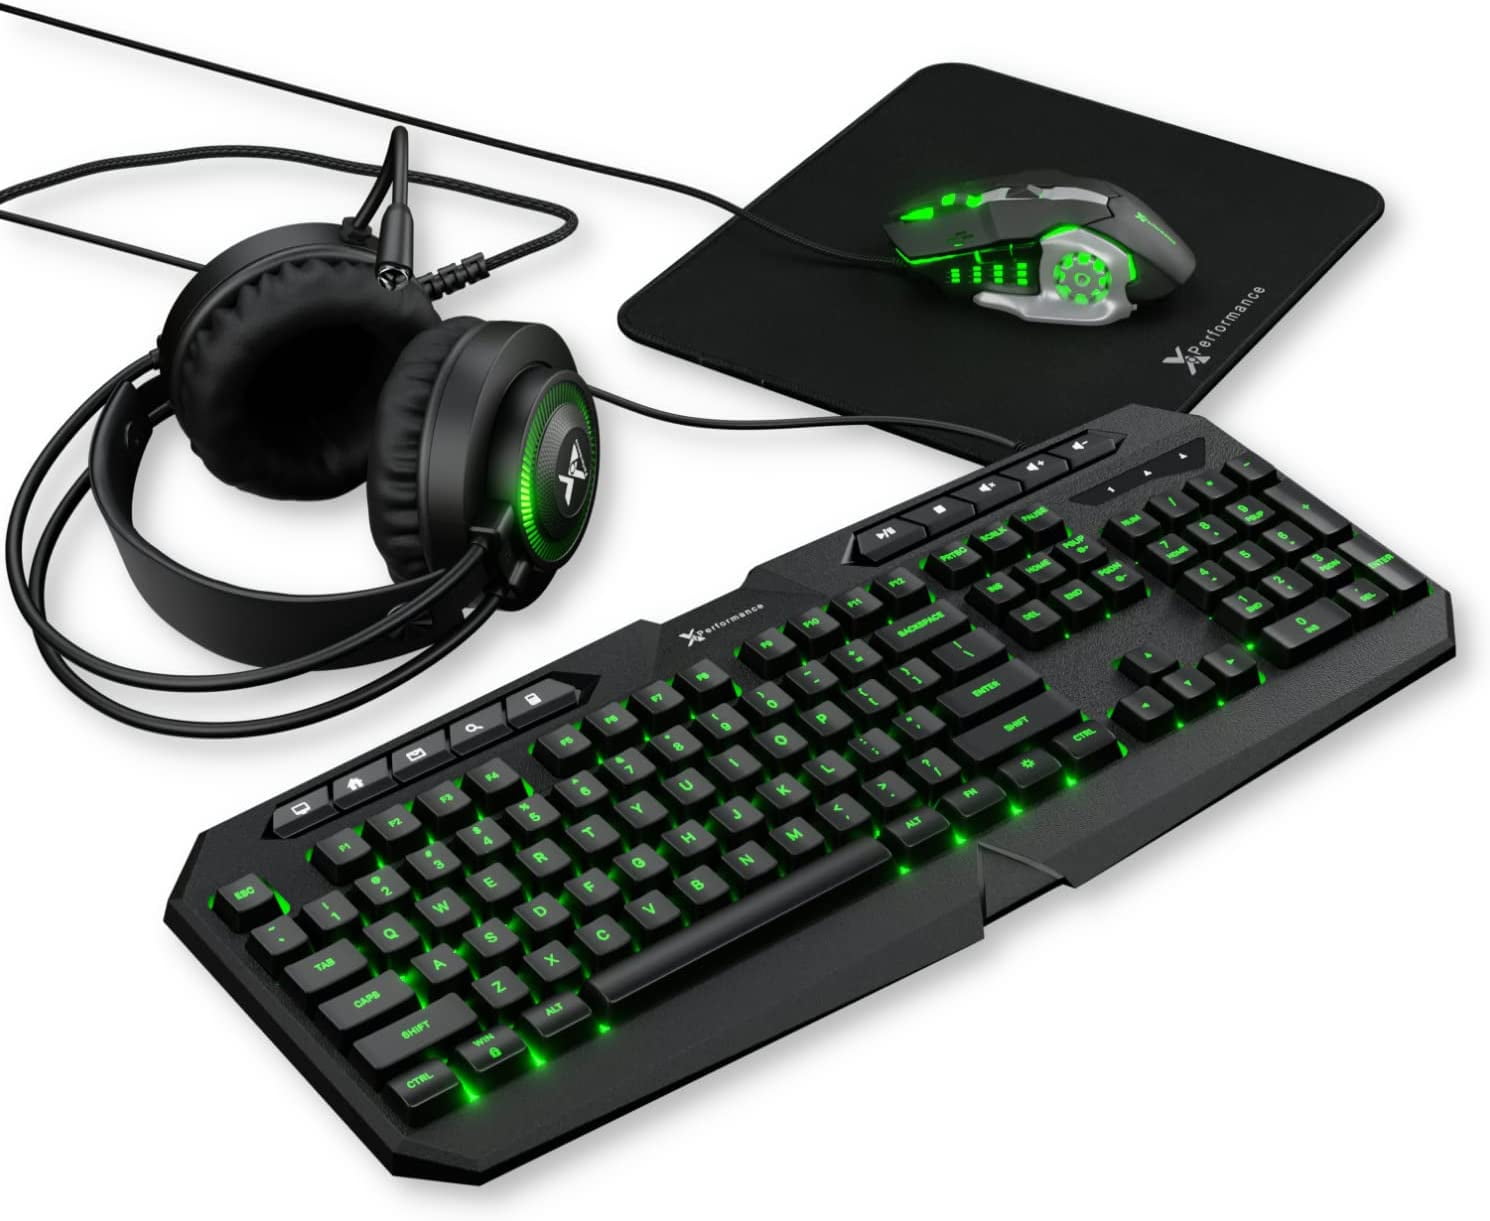 NEW) How to Play Xbox Cloud Gaming with a Mouse and Keyboard 